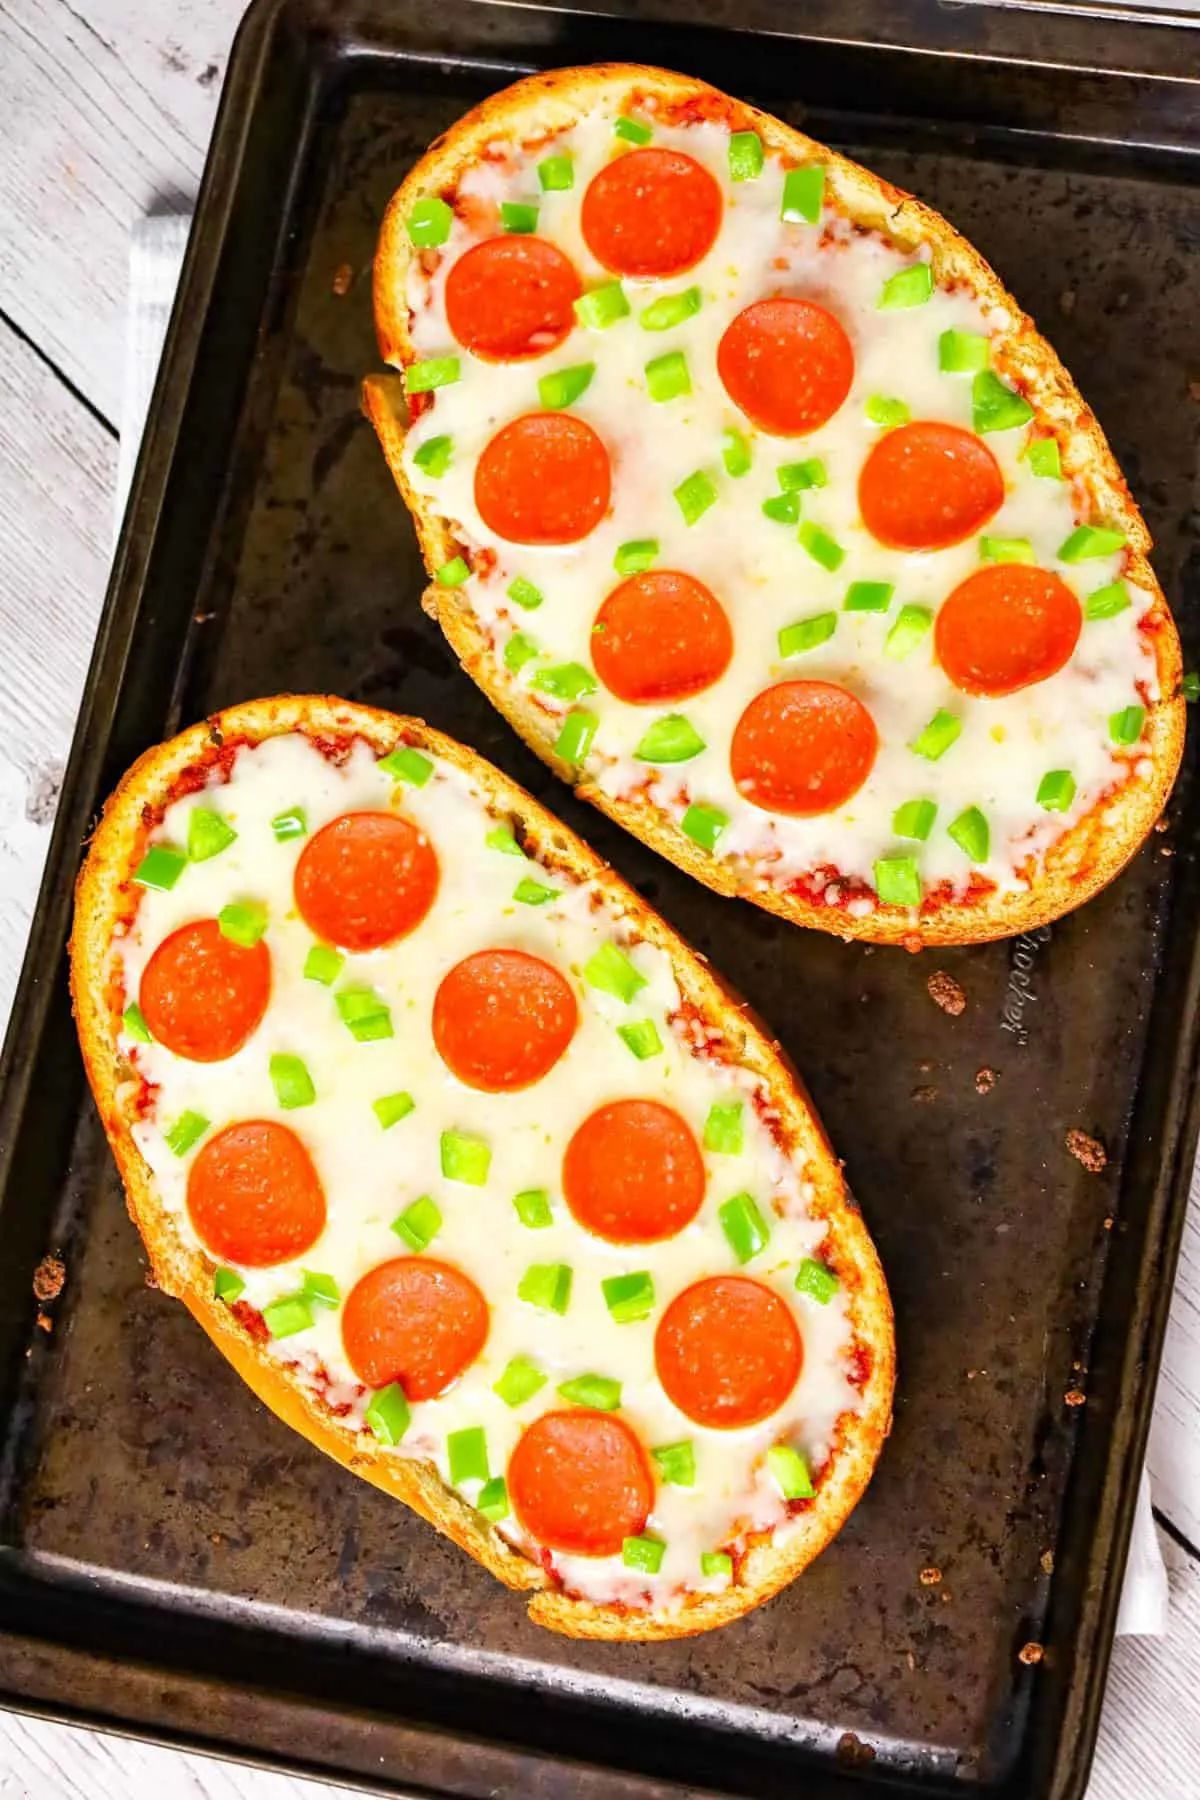 French Bread Pizza is an easy dinner or party snack recipe made with a large loaf of French or Italian bread toasted with garlic butter and topped with pizza sauce, cheese, pepperoni and green peppers.